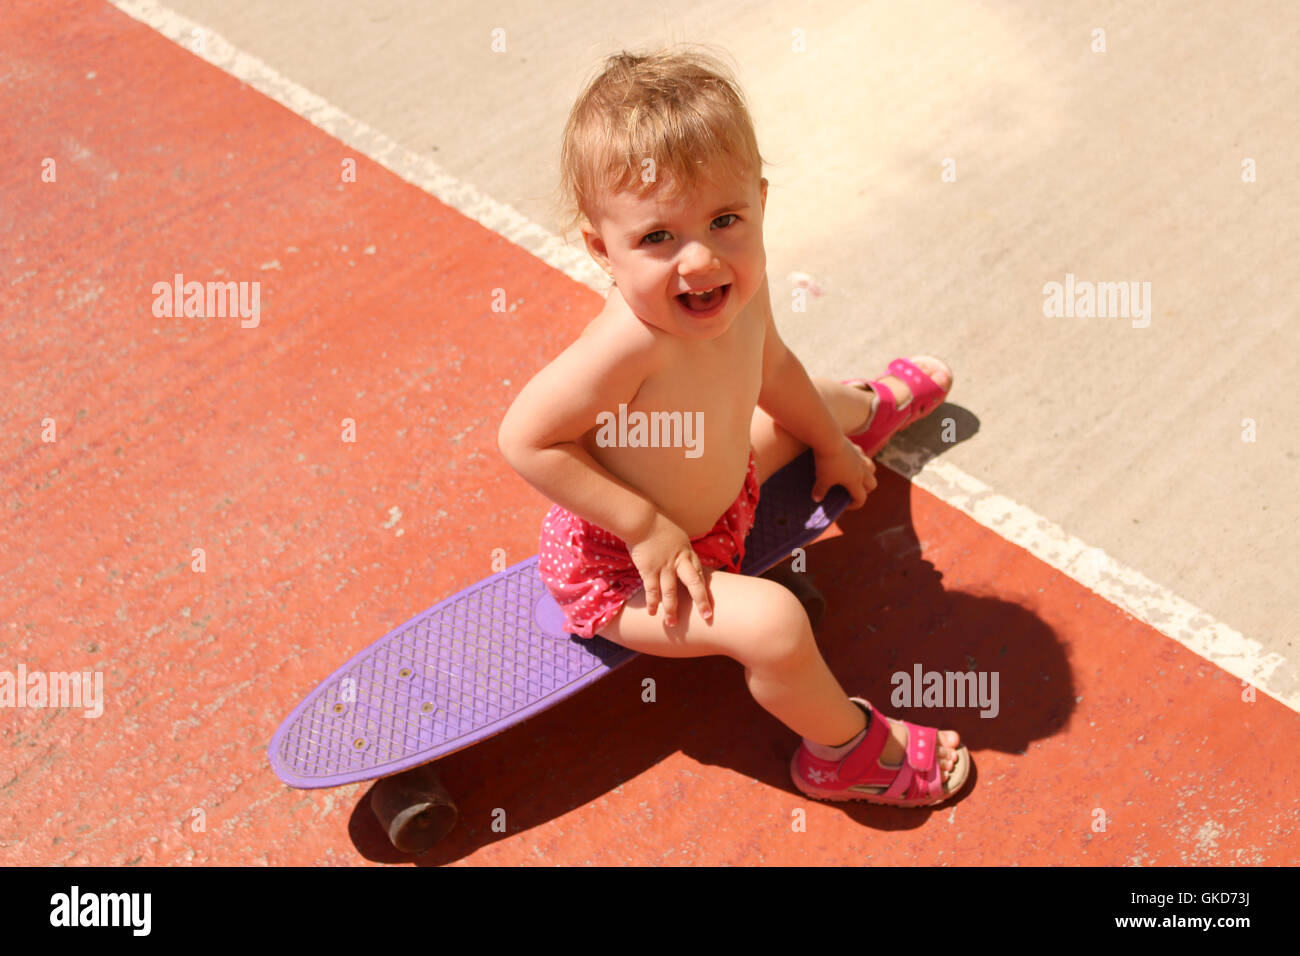 small child in shorts sitting on a skateboard summer sunny day Stock Photo